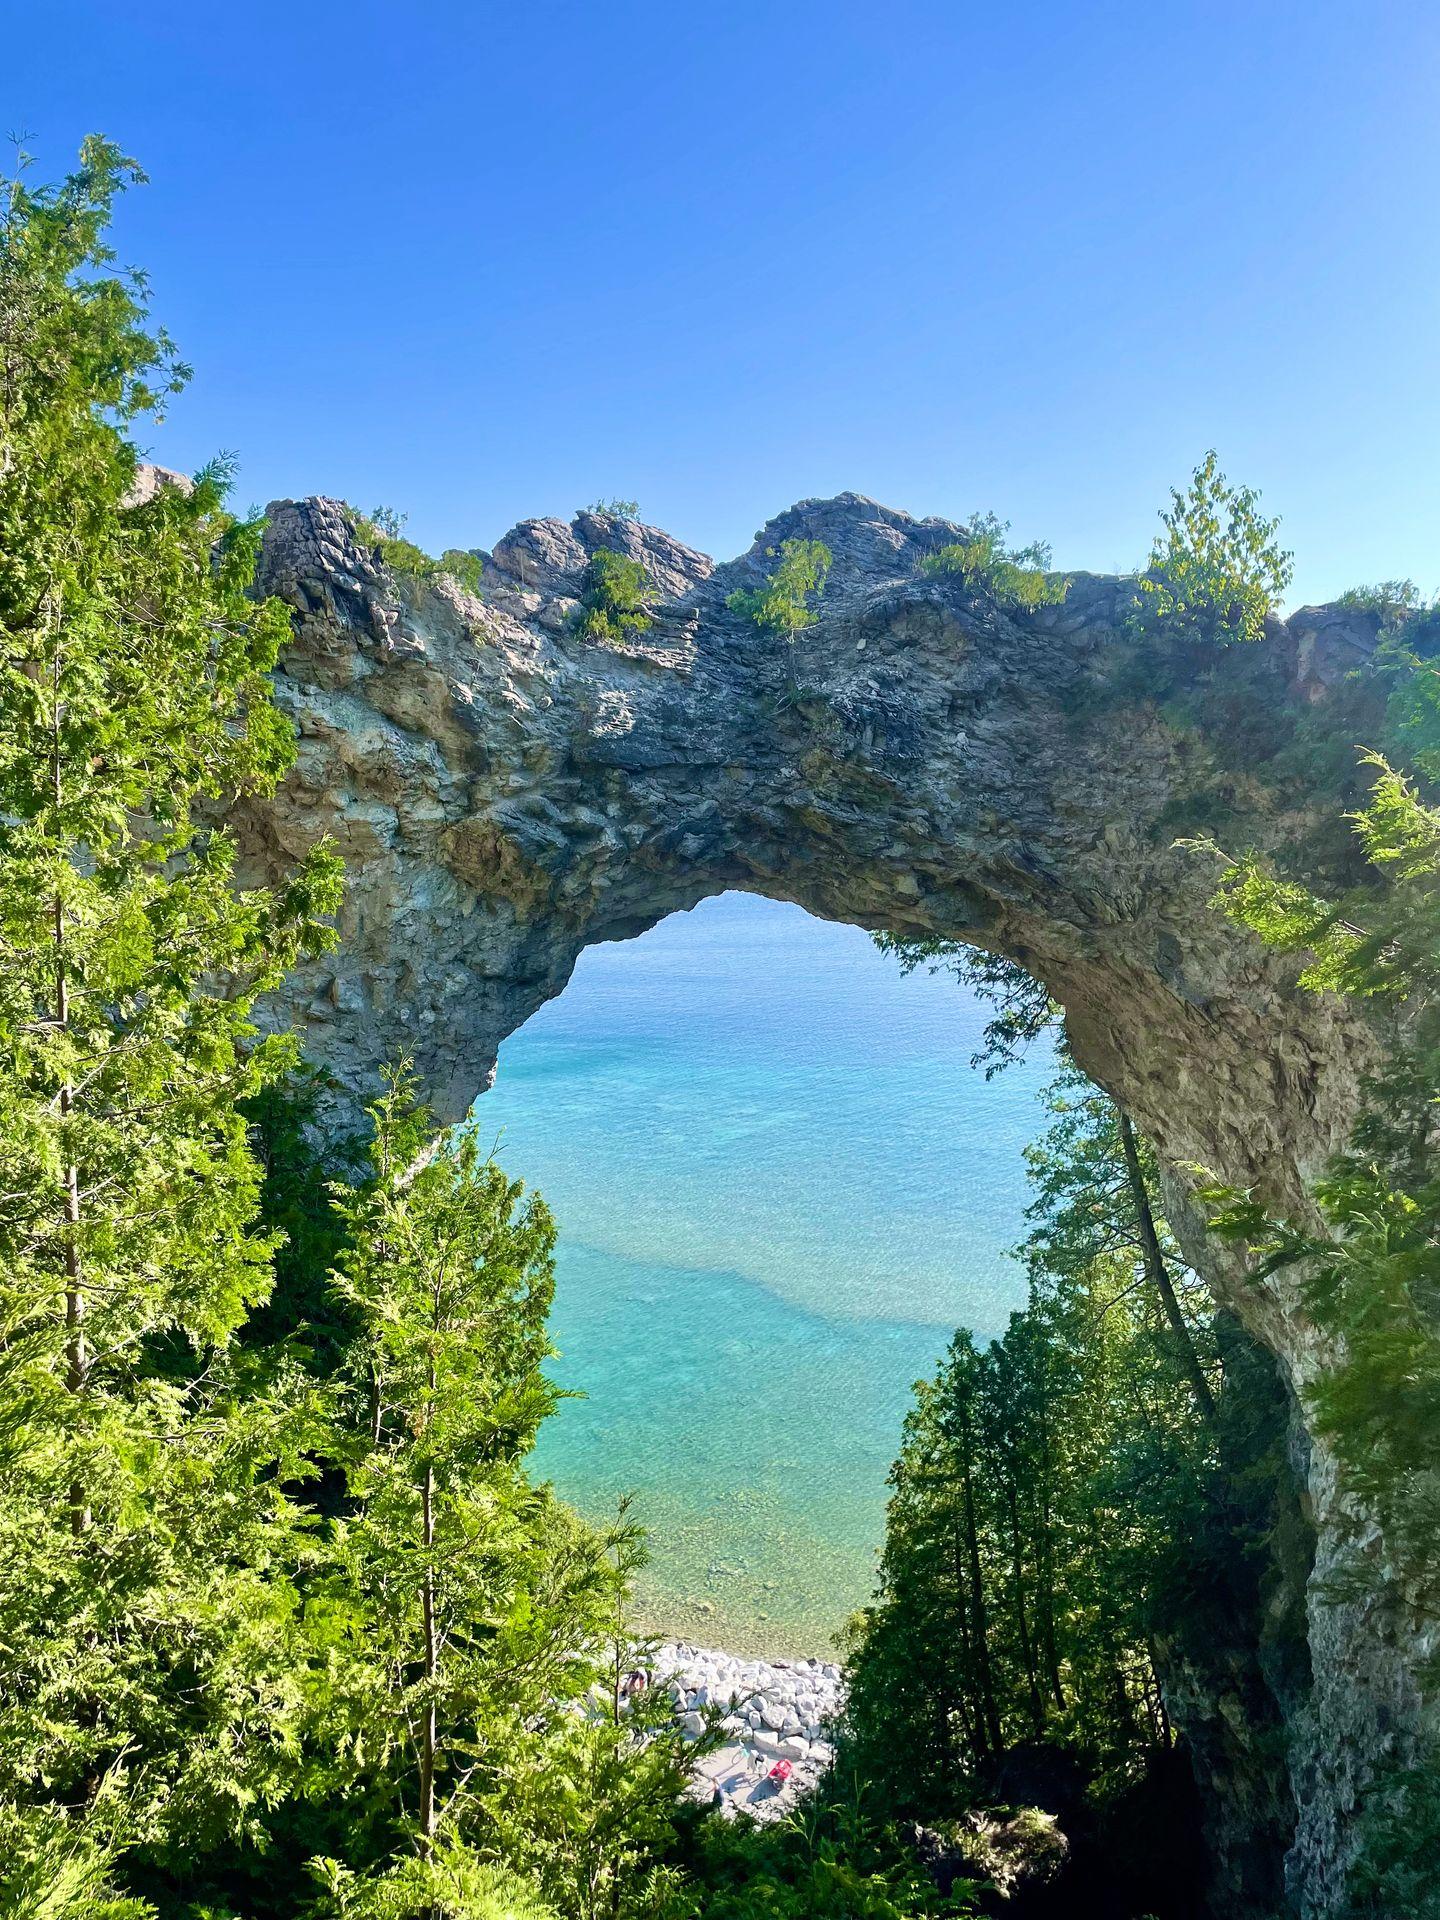 Looking directly at Arch Rock with the aqua-blue color of Lake Huron seen through the arch.